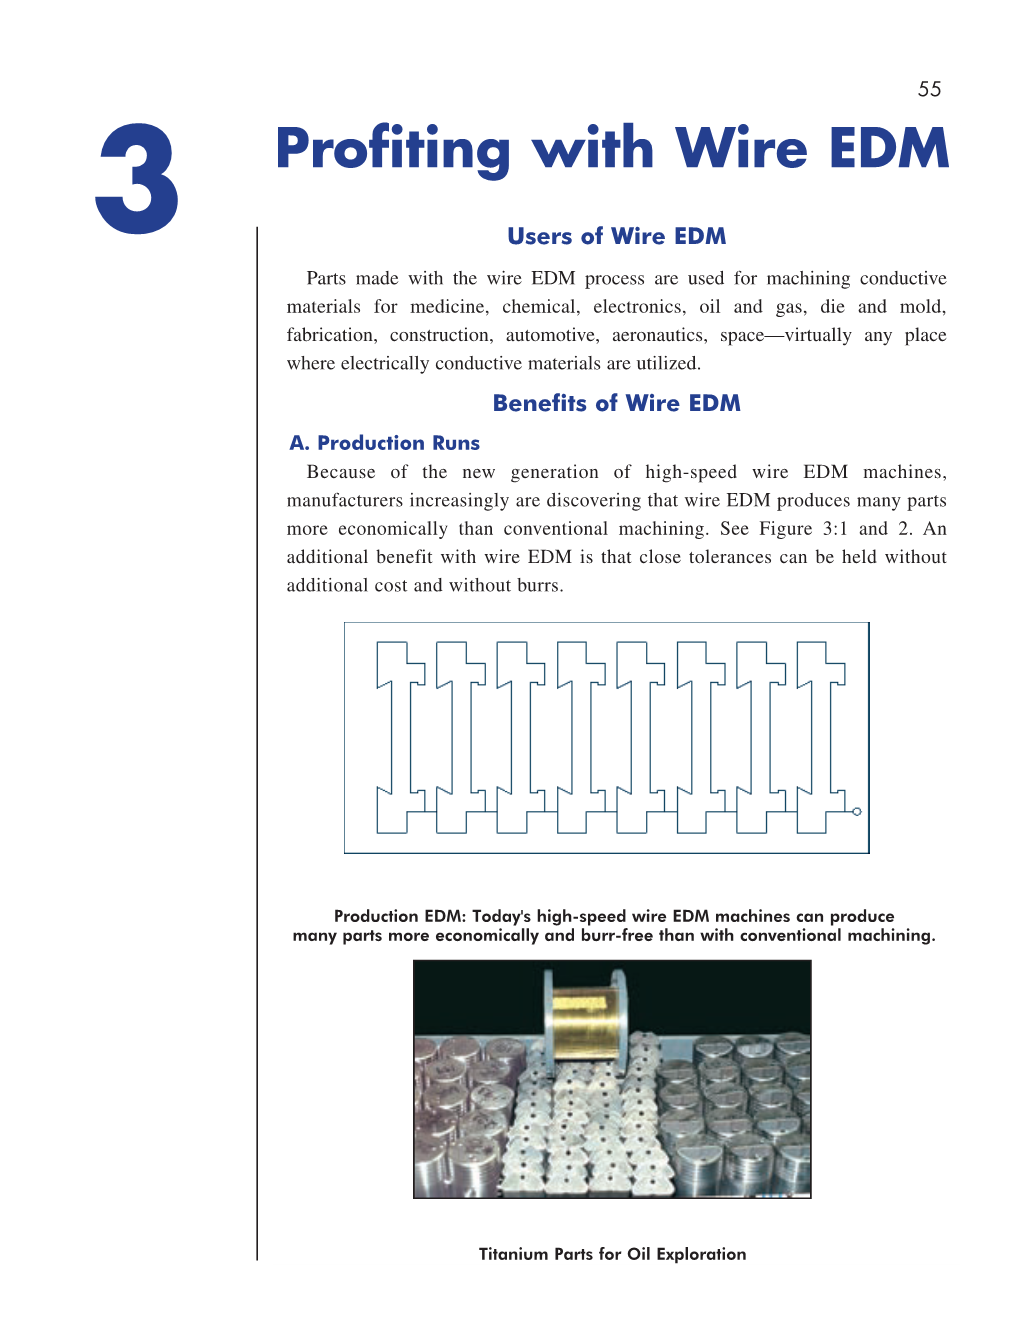 3. Profiting with Wire